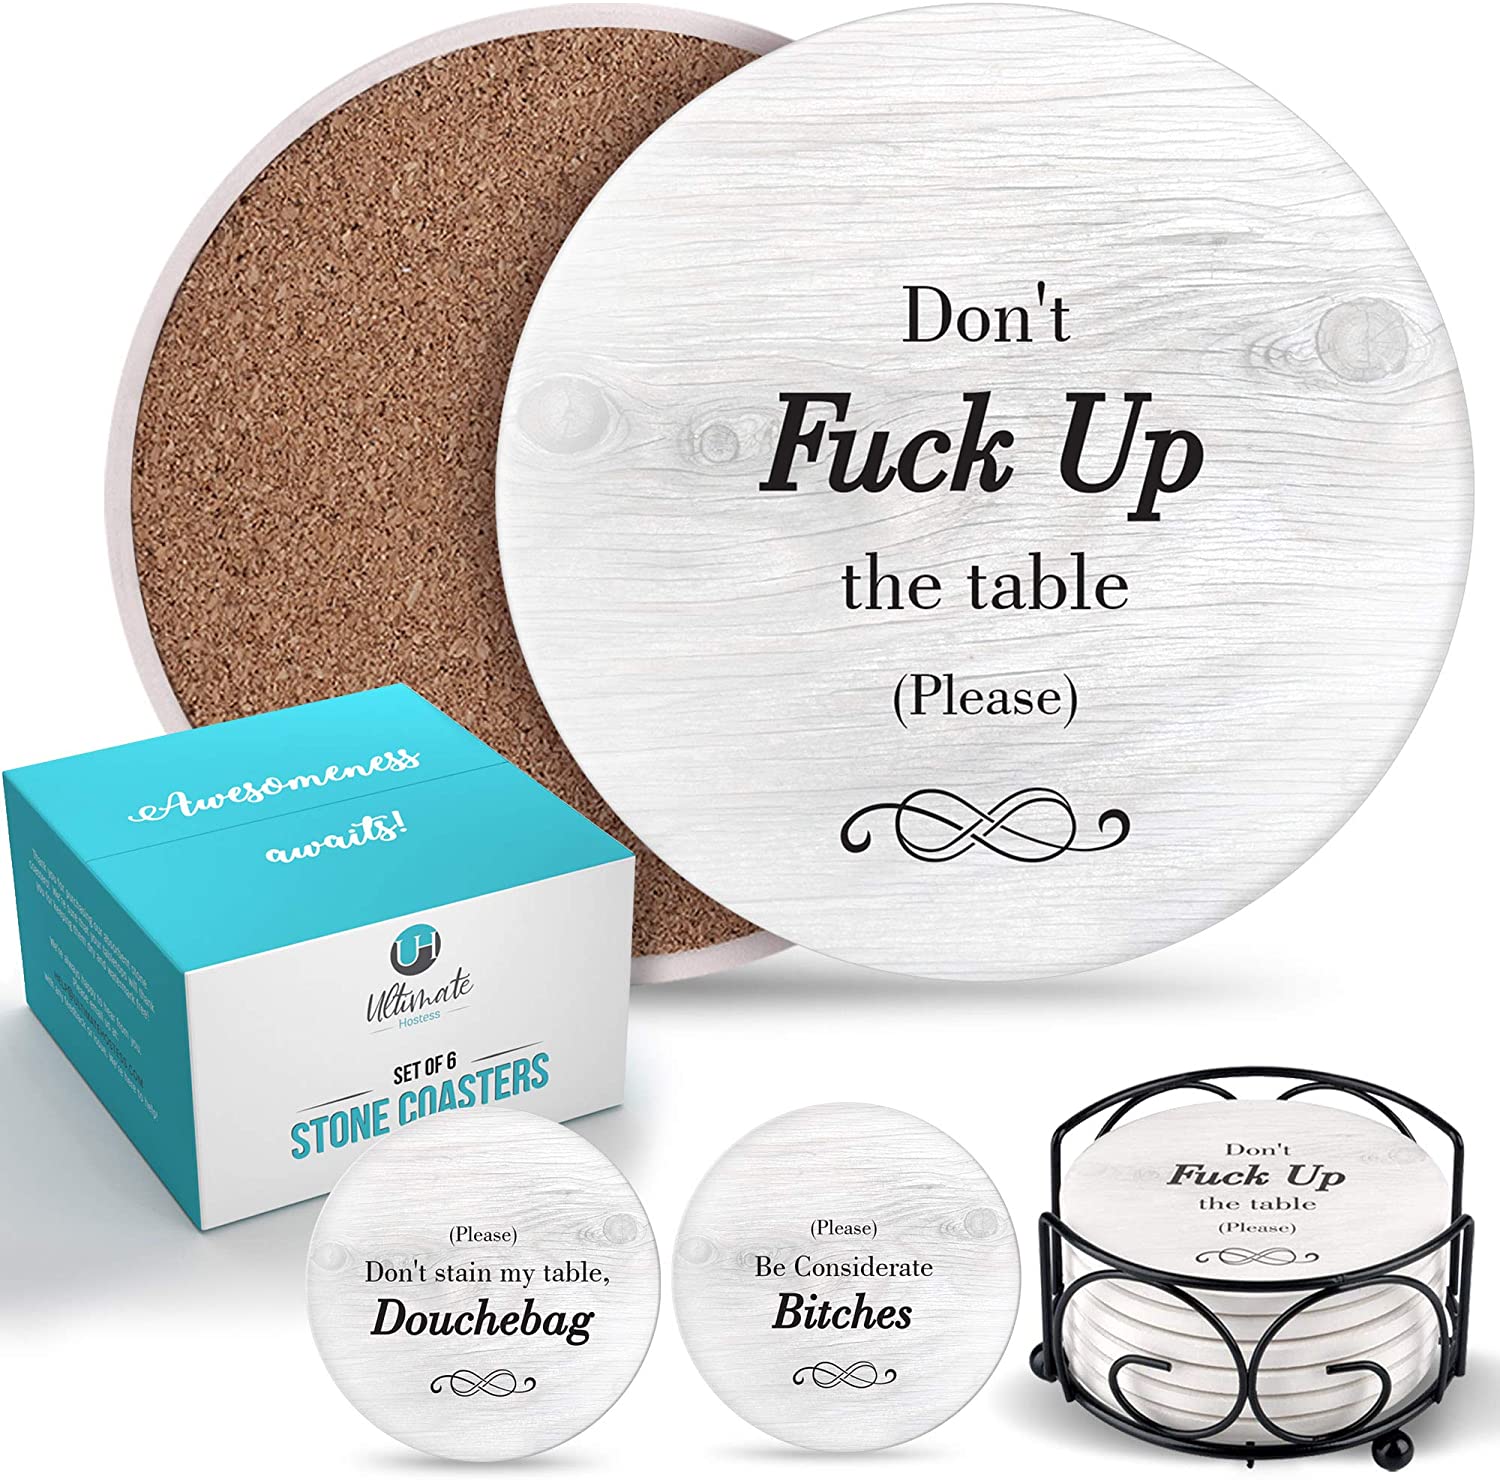 Funny Coasters for Drinks with Holder - Like Want Have